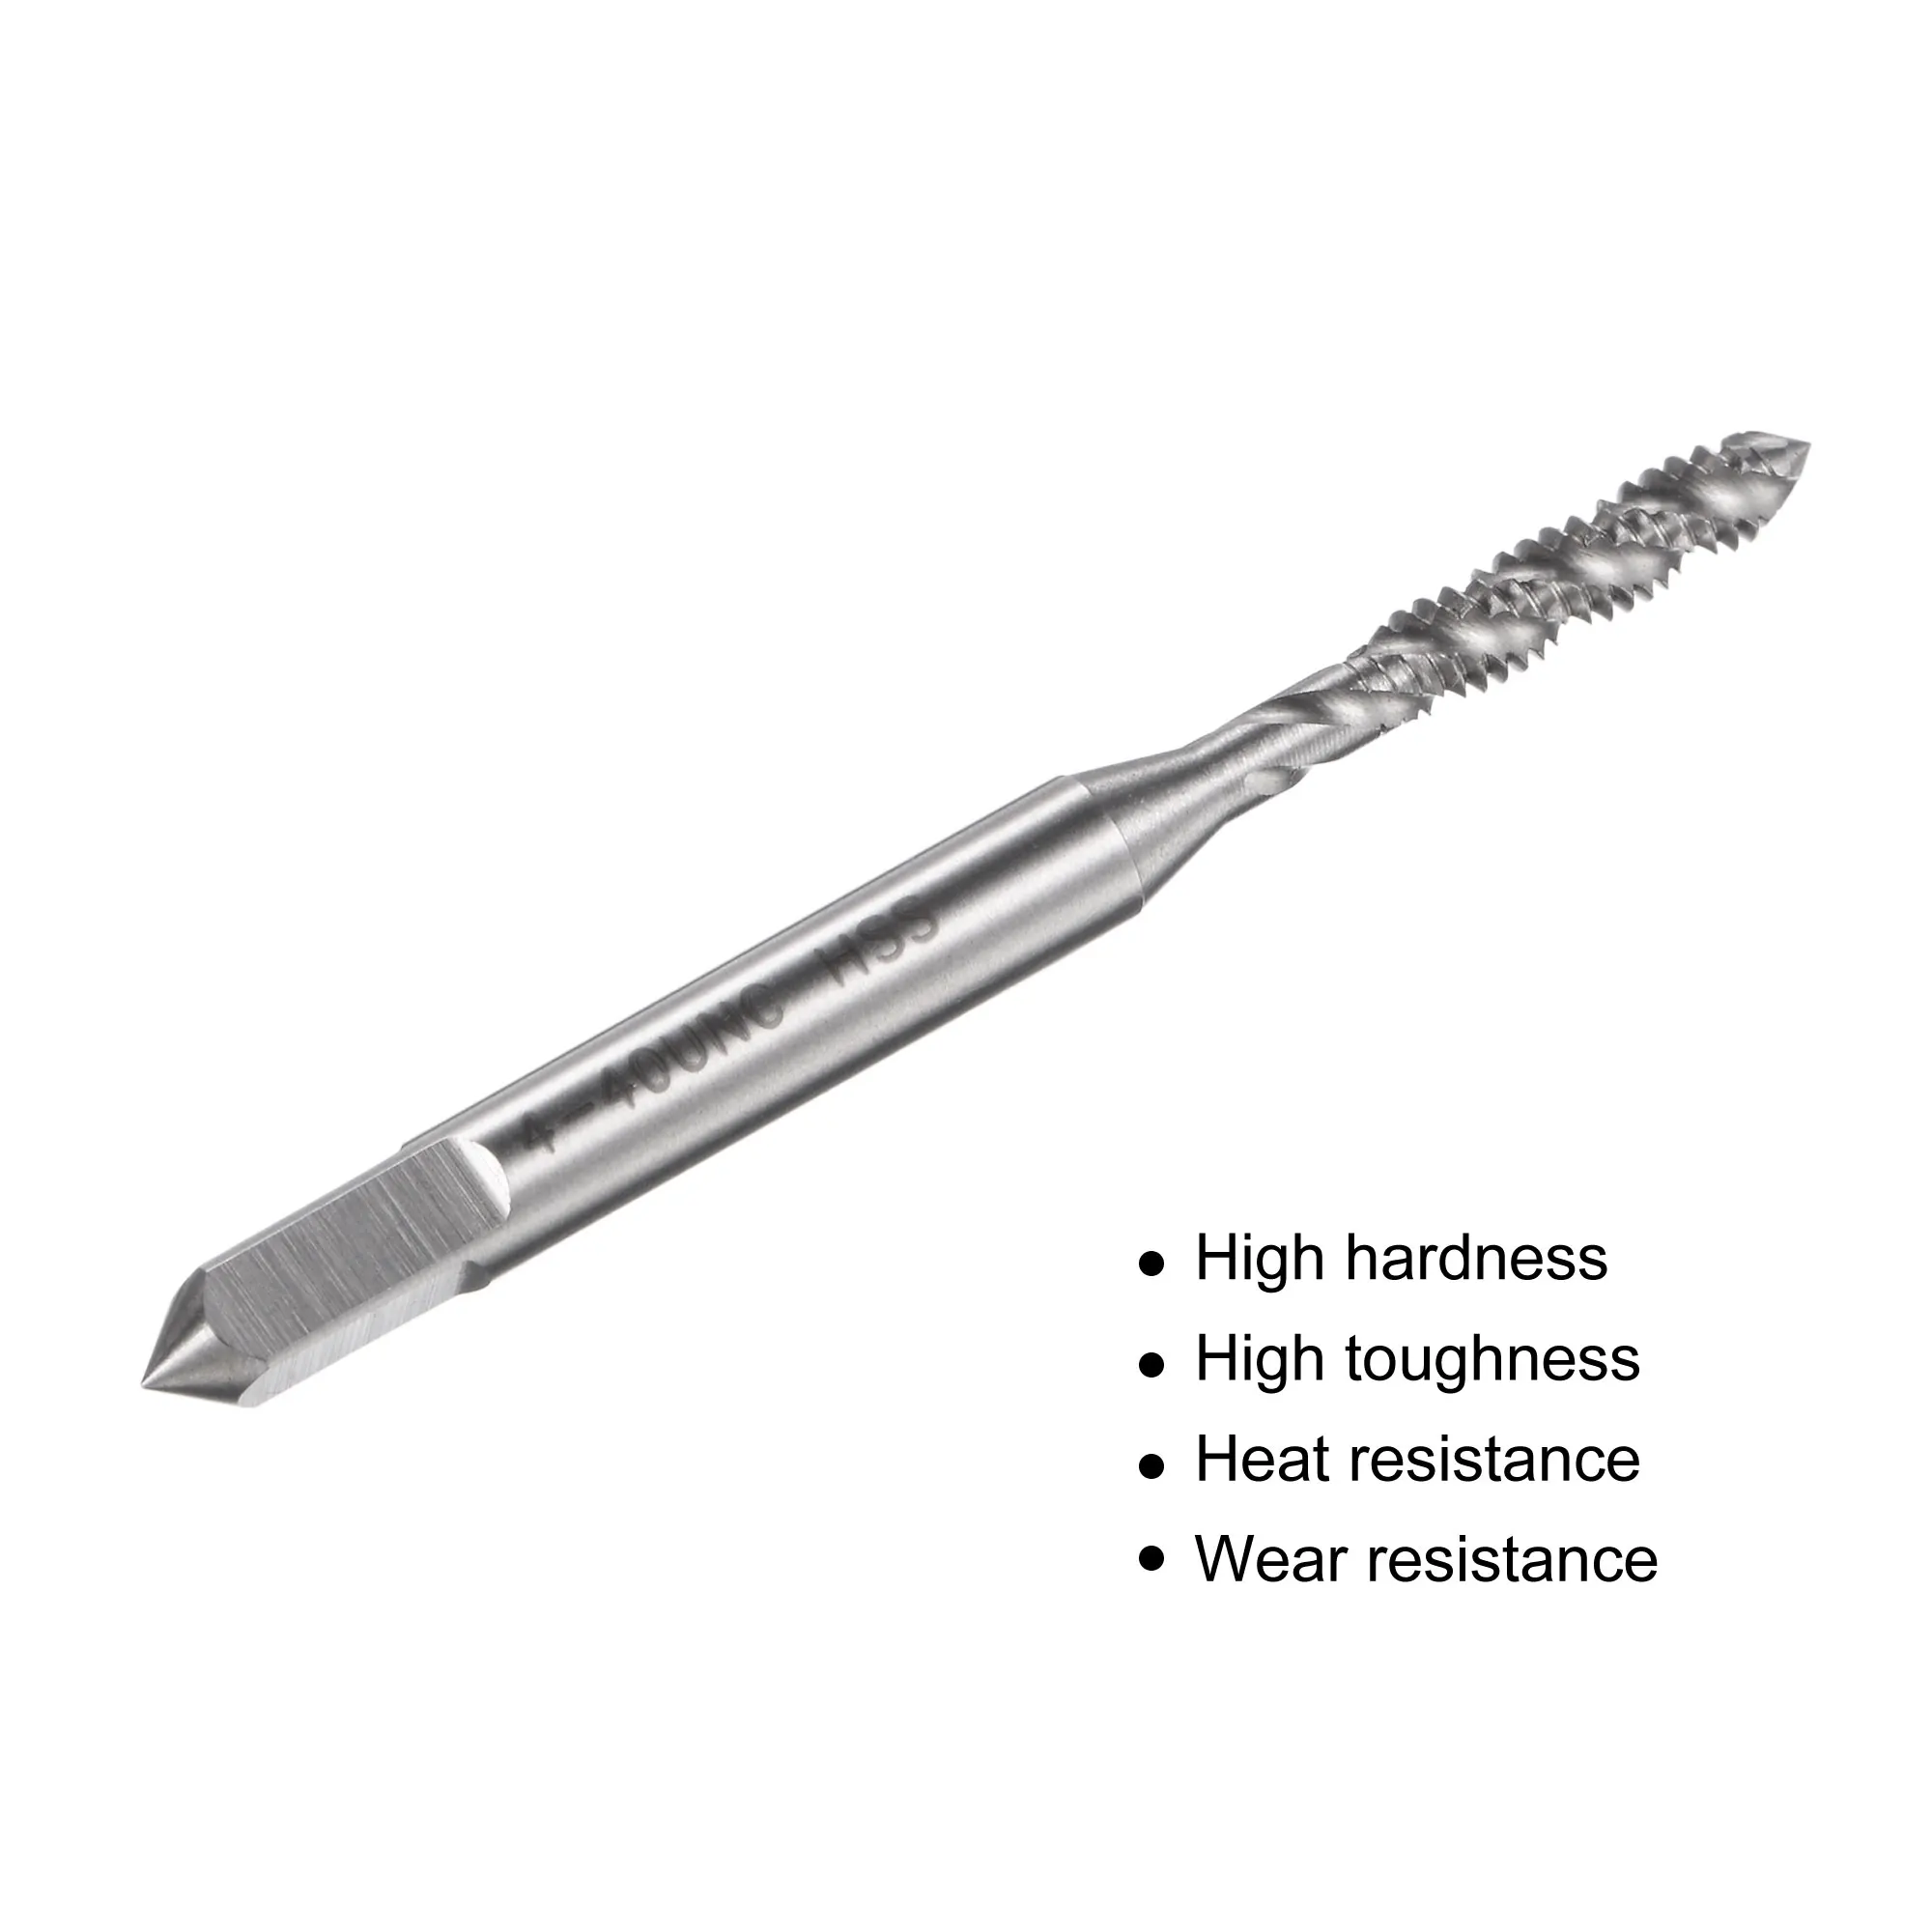 HSS High Speed Steel Titanium Plated Machine Thread Screw Tap 3 Flutes Tapping Tool H2 Tolerance uxcell Spiral Flute Threading Tap 4-40 UNC 